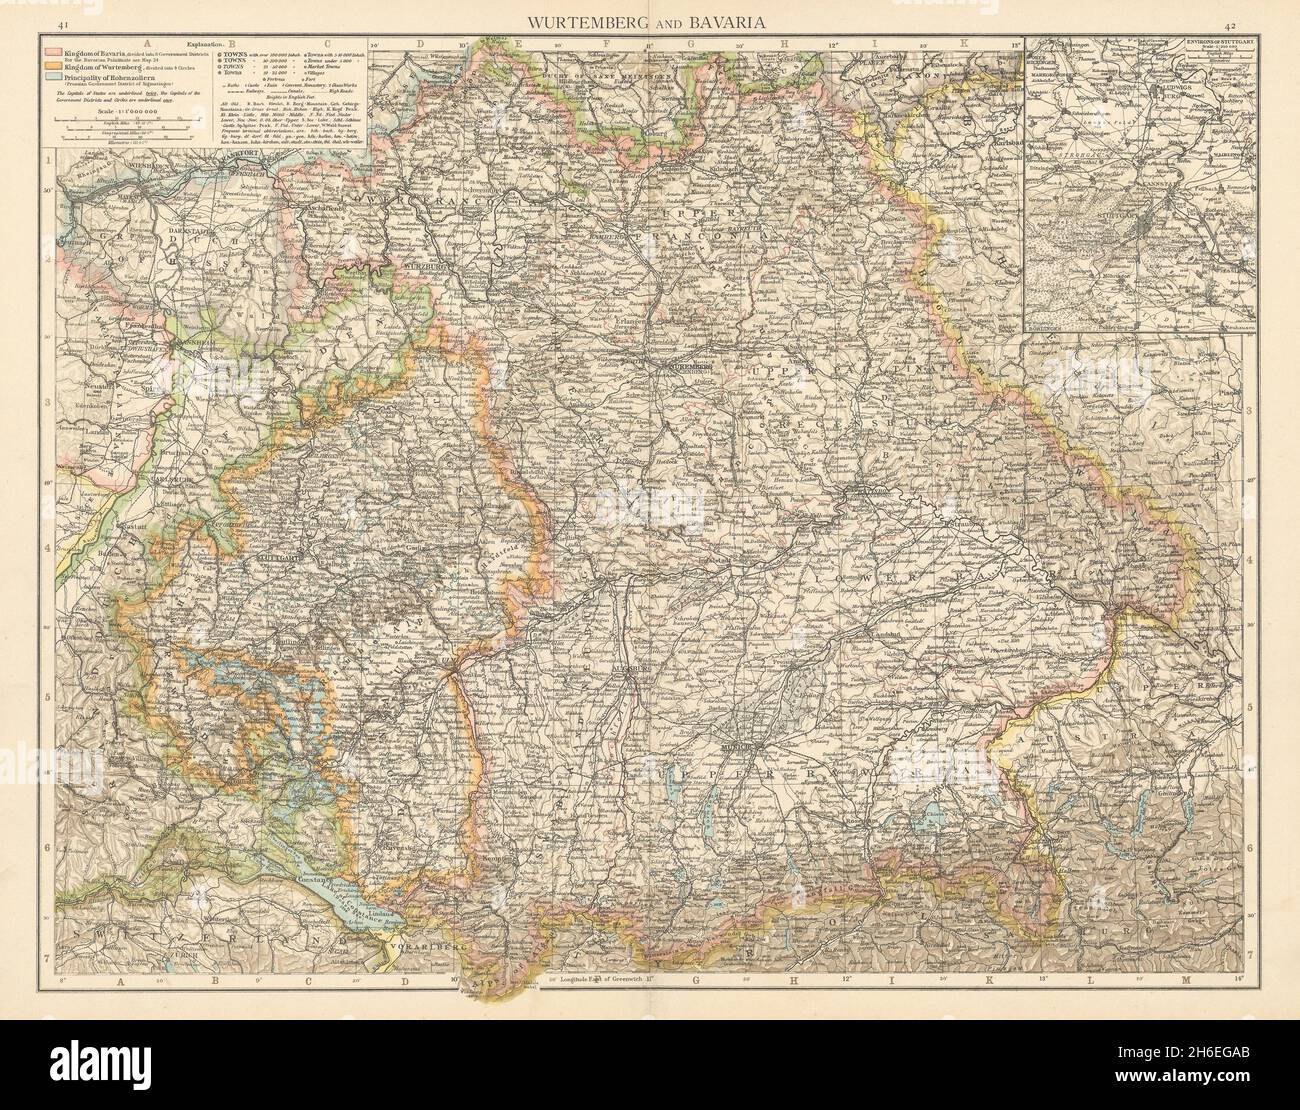 Wurtemberg & Bavaria. Principality of Hohenzollern. THE TIMES 1895 old map Stock Photo